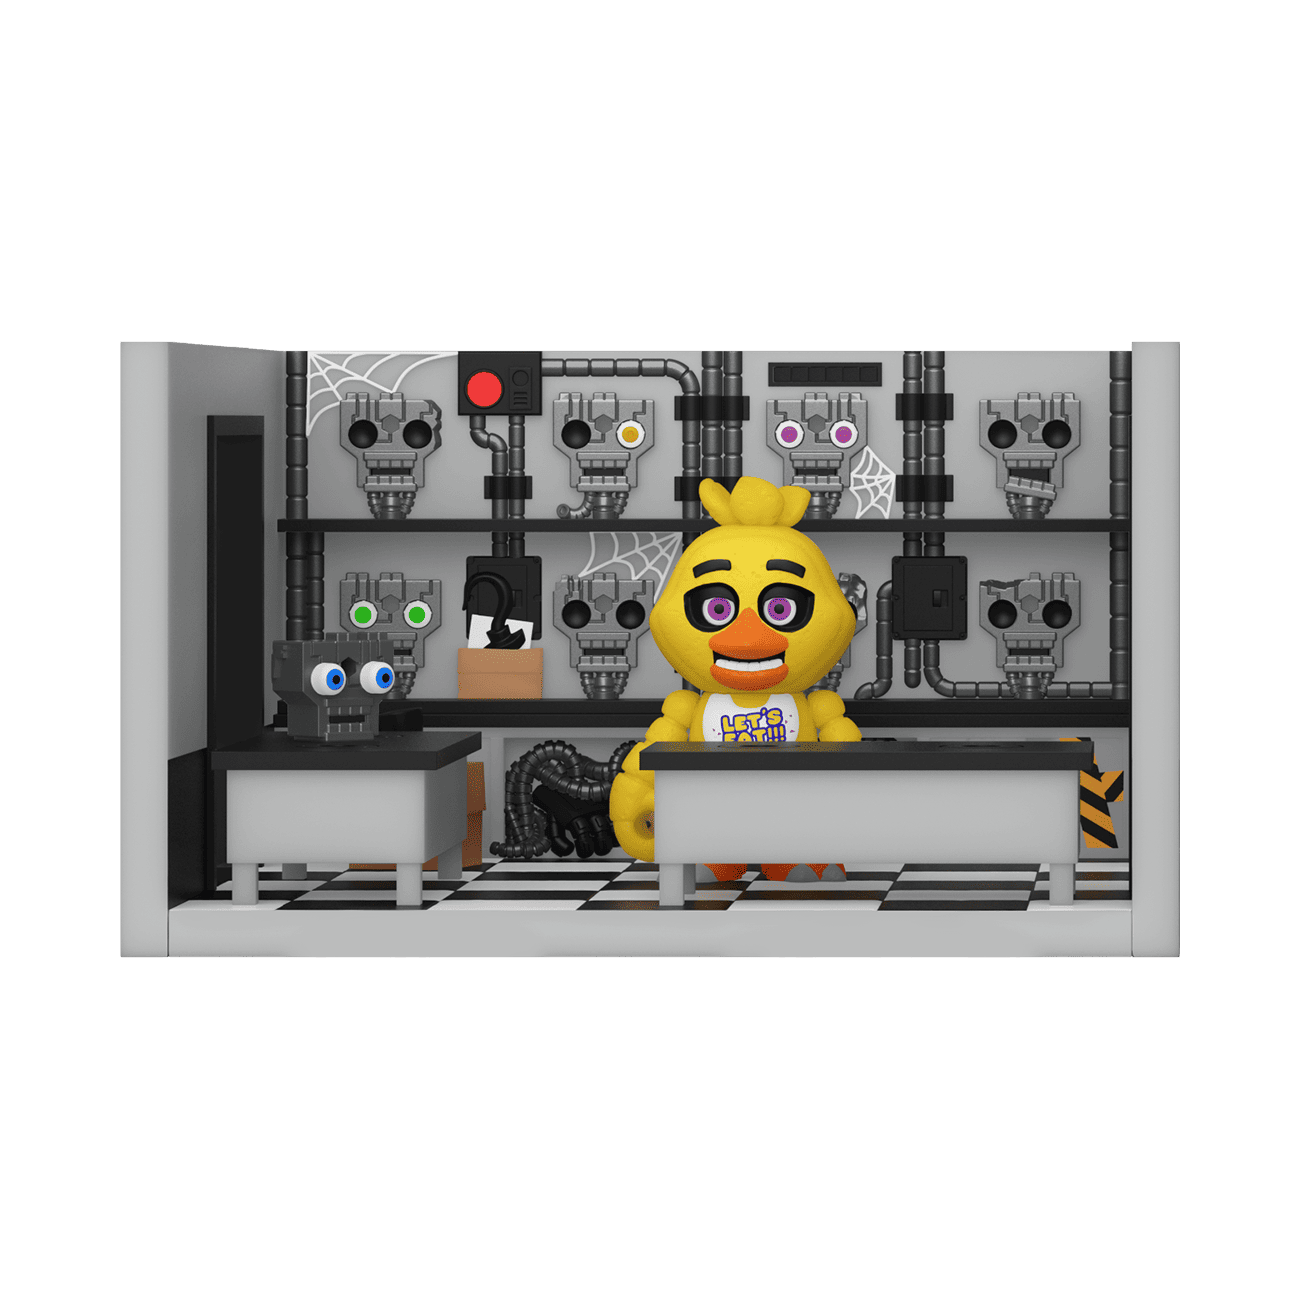  Funko Snaps!: Five Nights at Freddy's - Toy Chica and